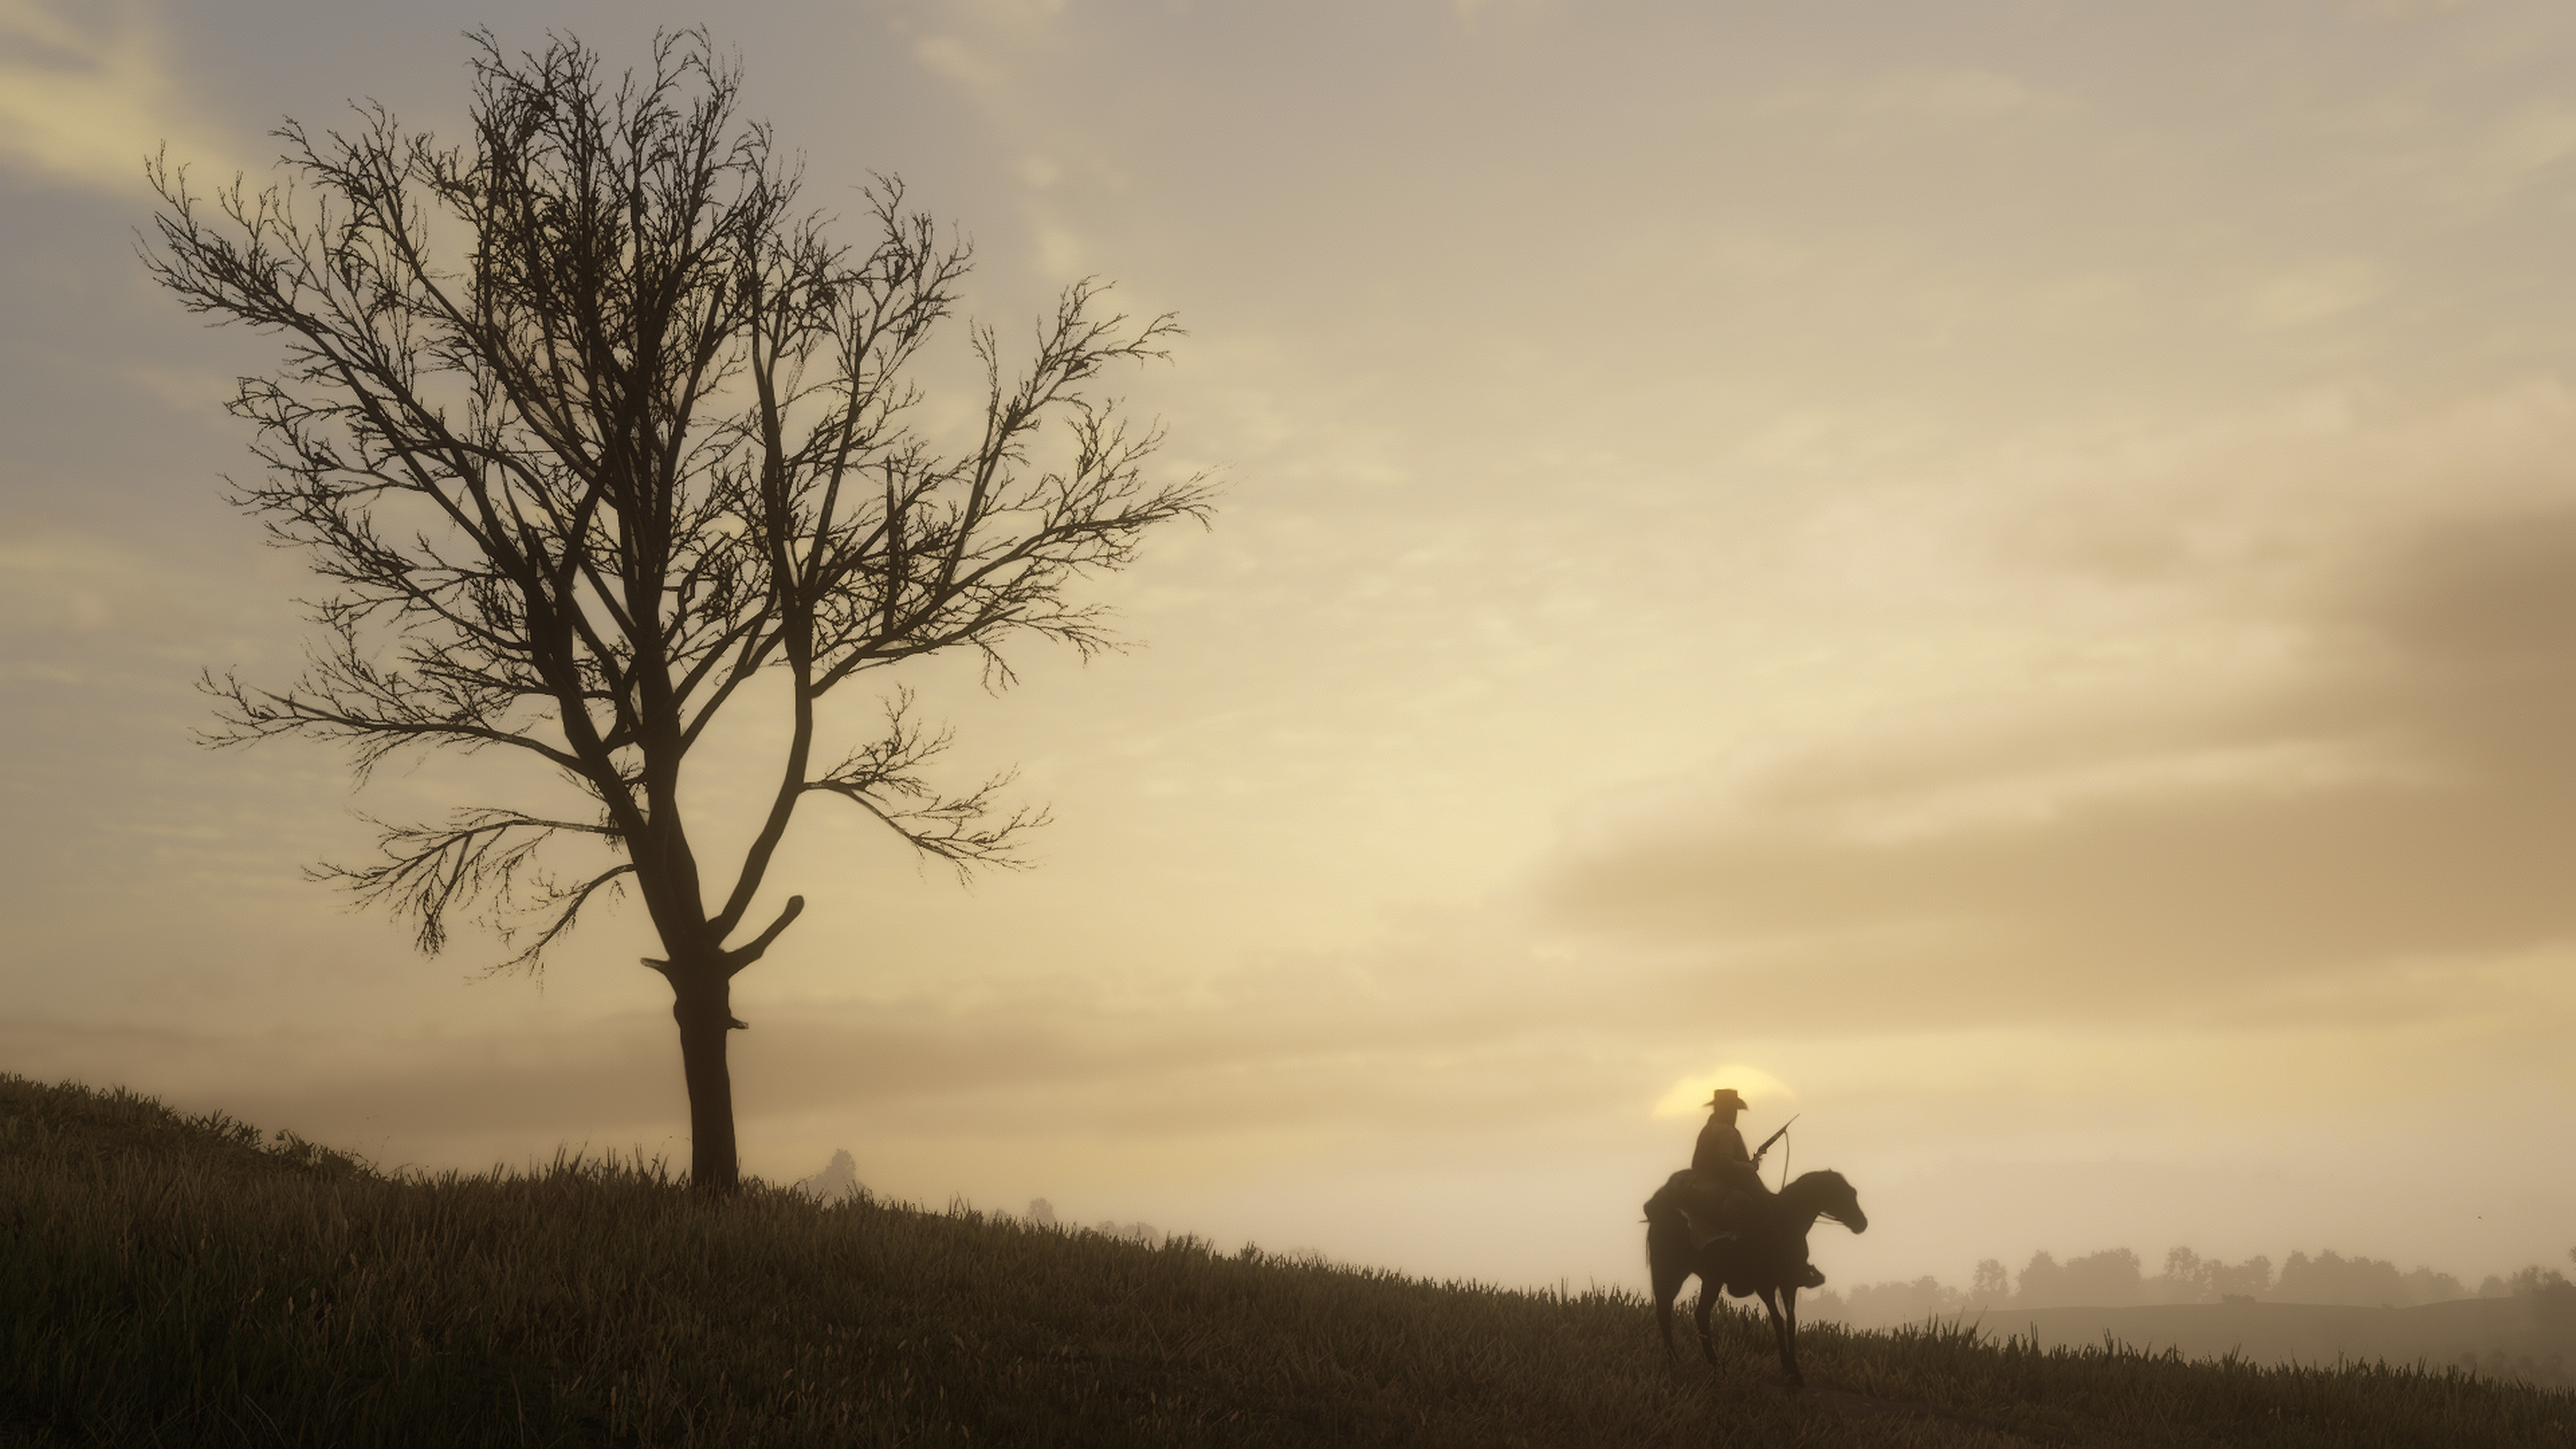 Red Dead Redemption Red Dead Redemption 2 Video Game Art Video Games Cowboys Horse 3840x2160